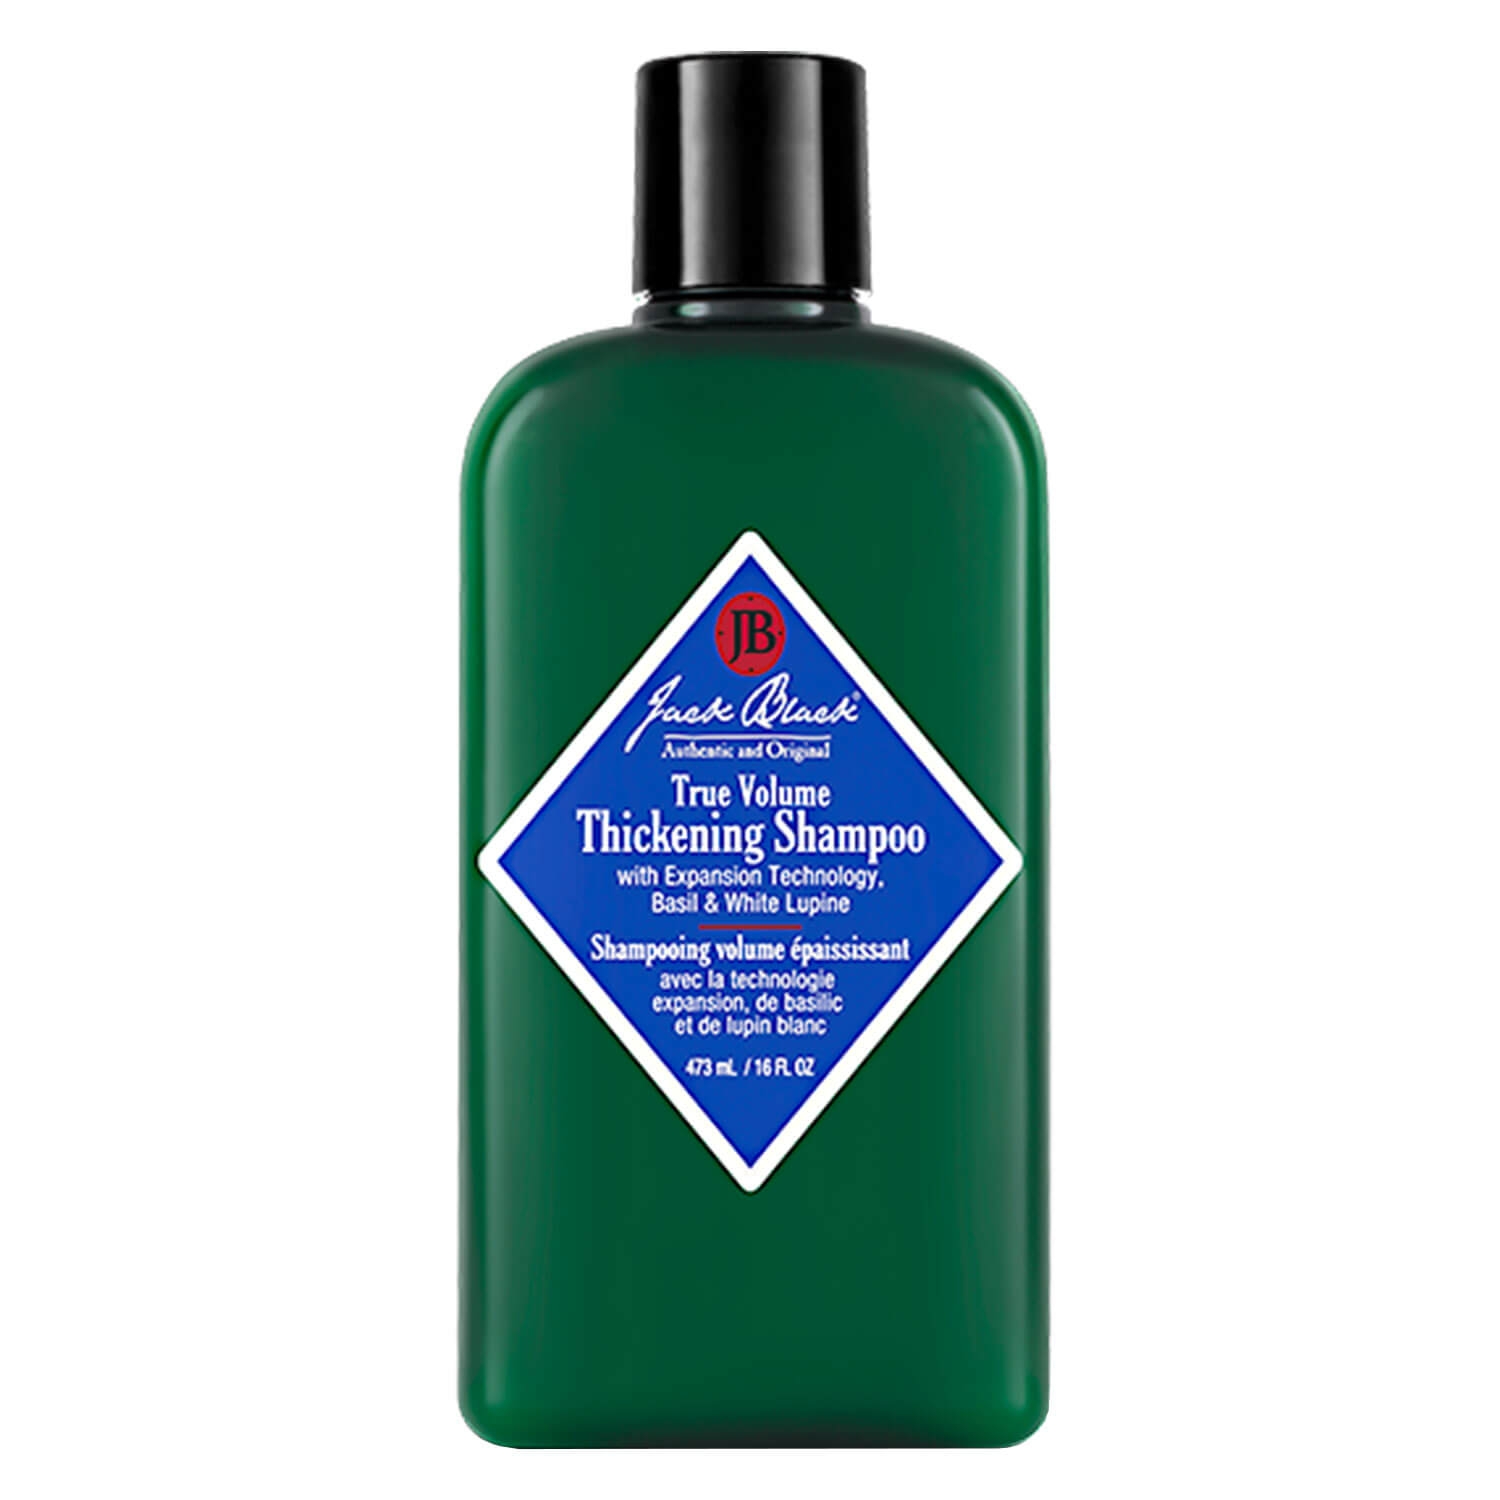 Product image from Jack Black - True Volume Thickening Shampoo